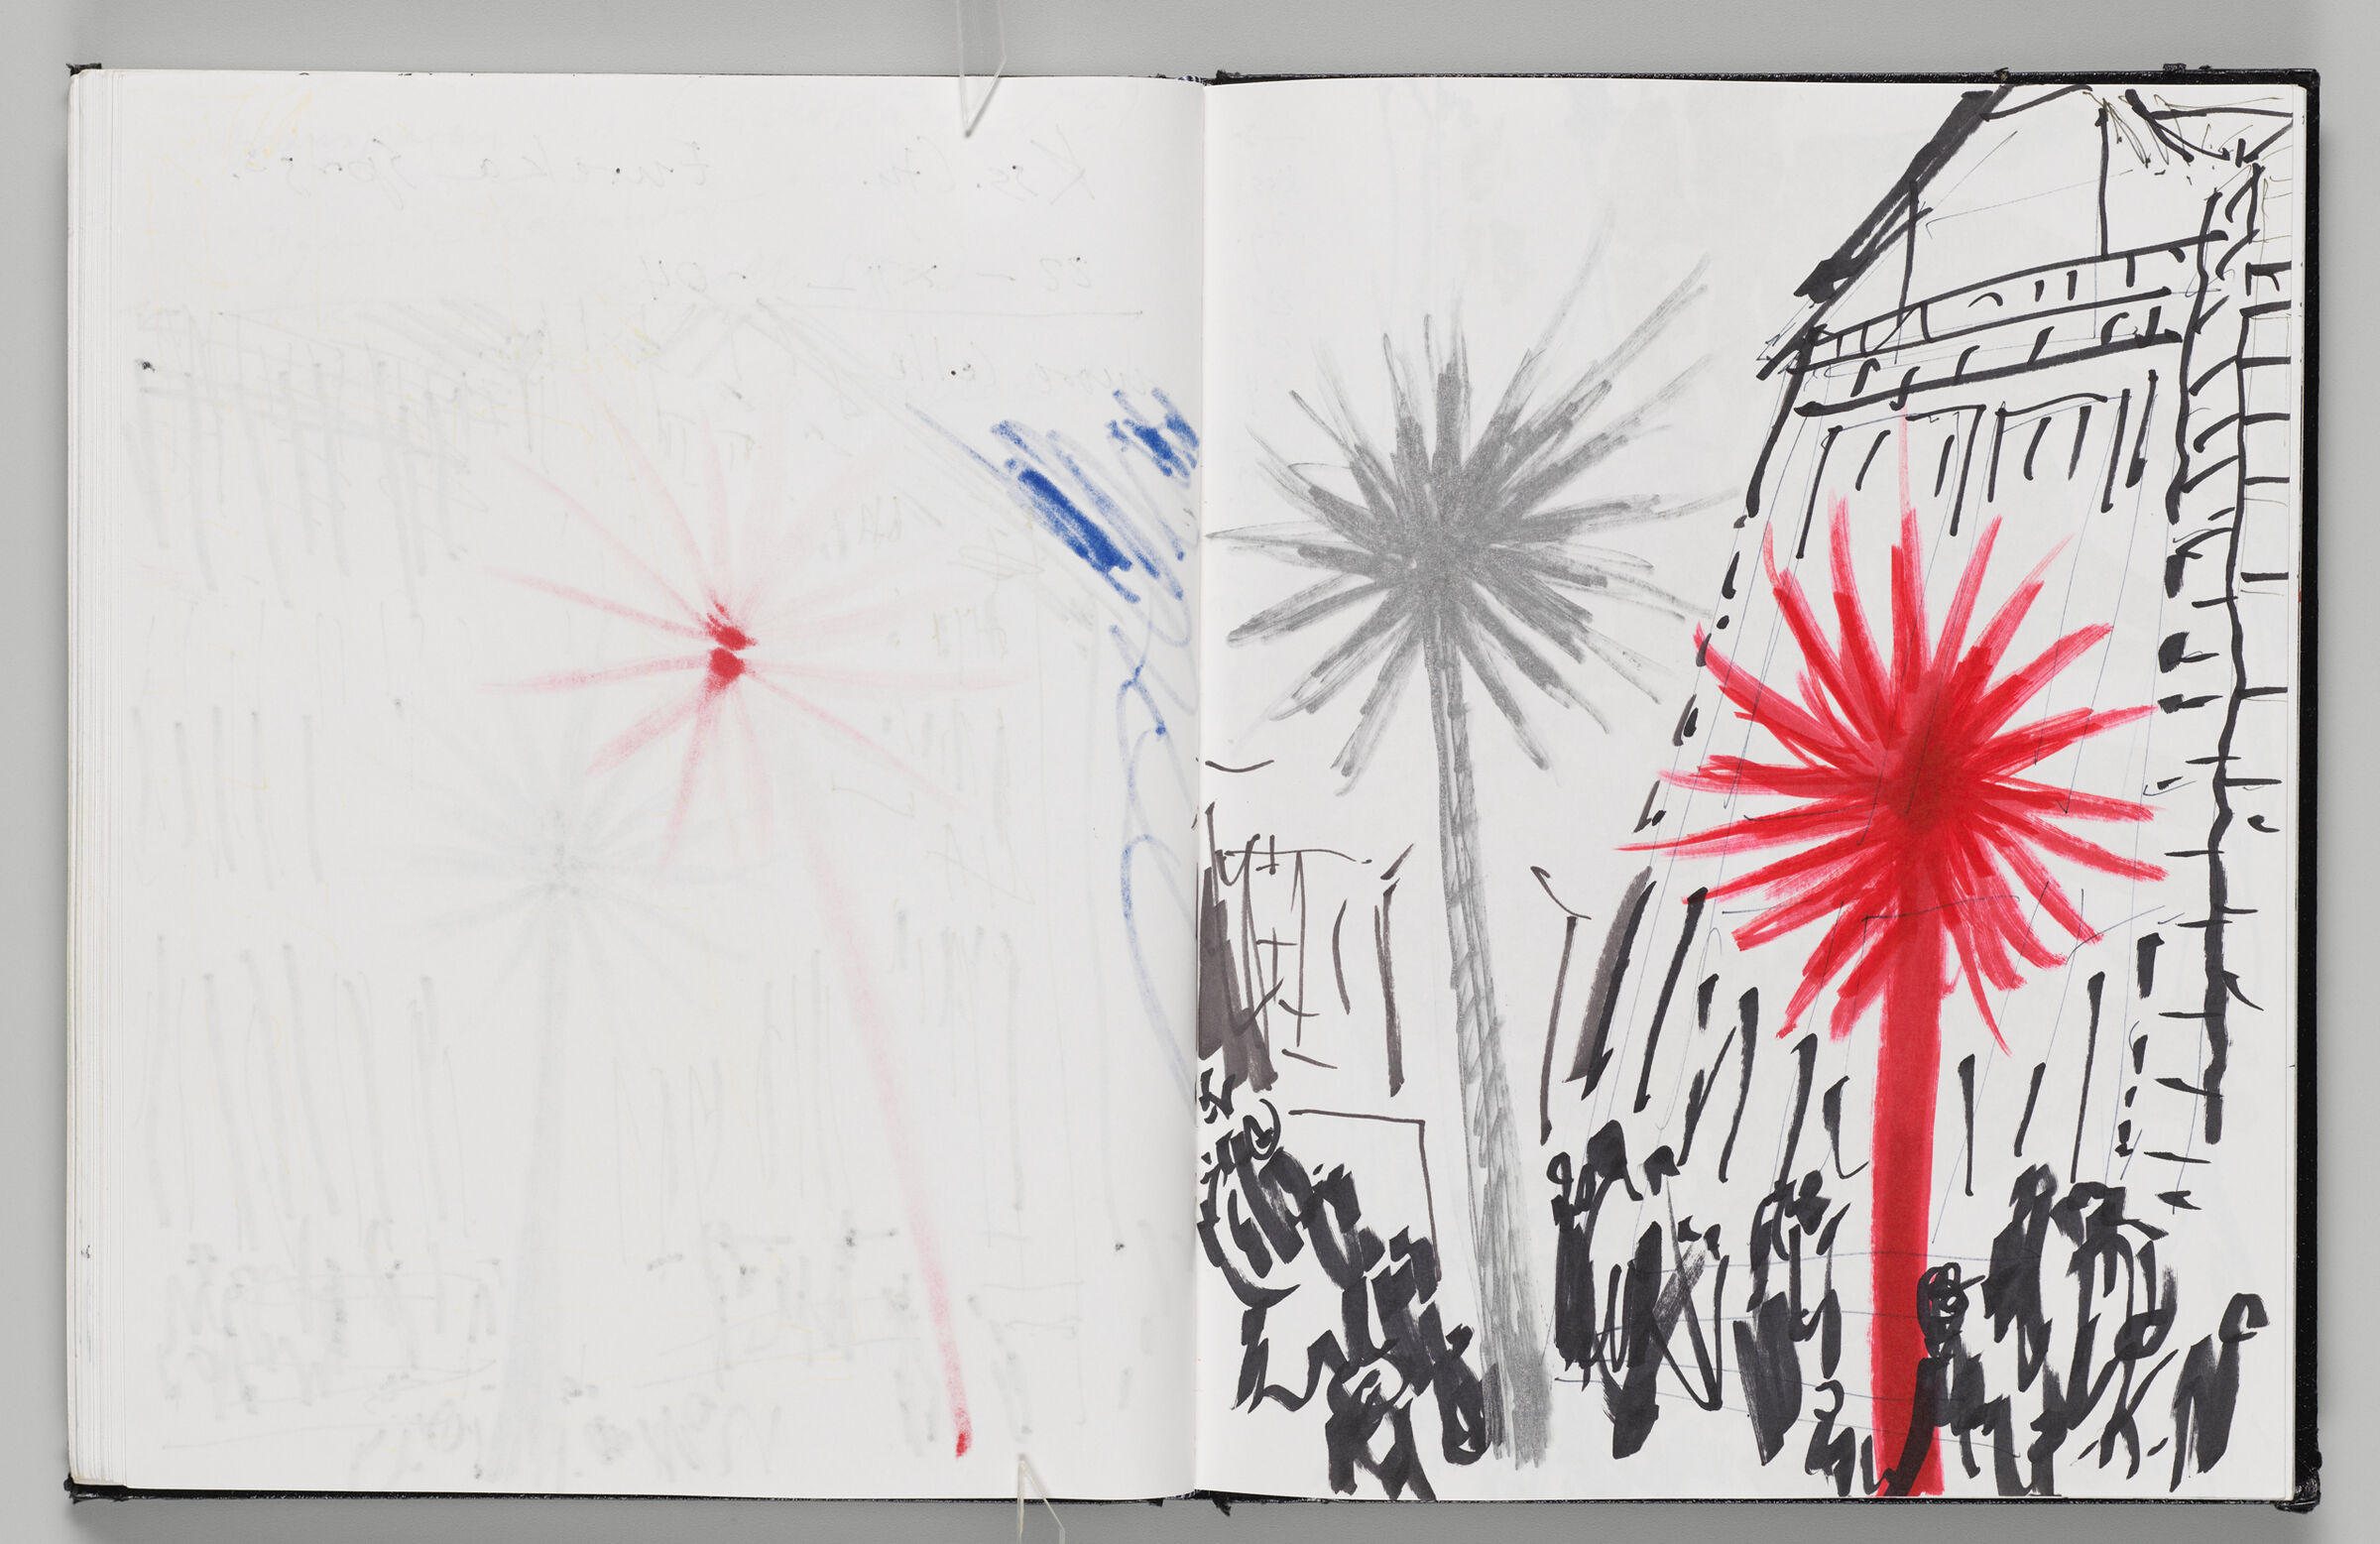 Untitled (Bleed-Through Of Previous Page, Left Page); Untitled (Sketch Of Inflatables, Right Page)